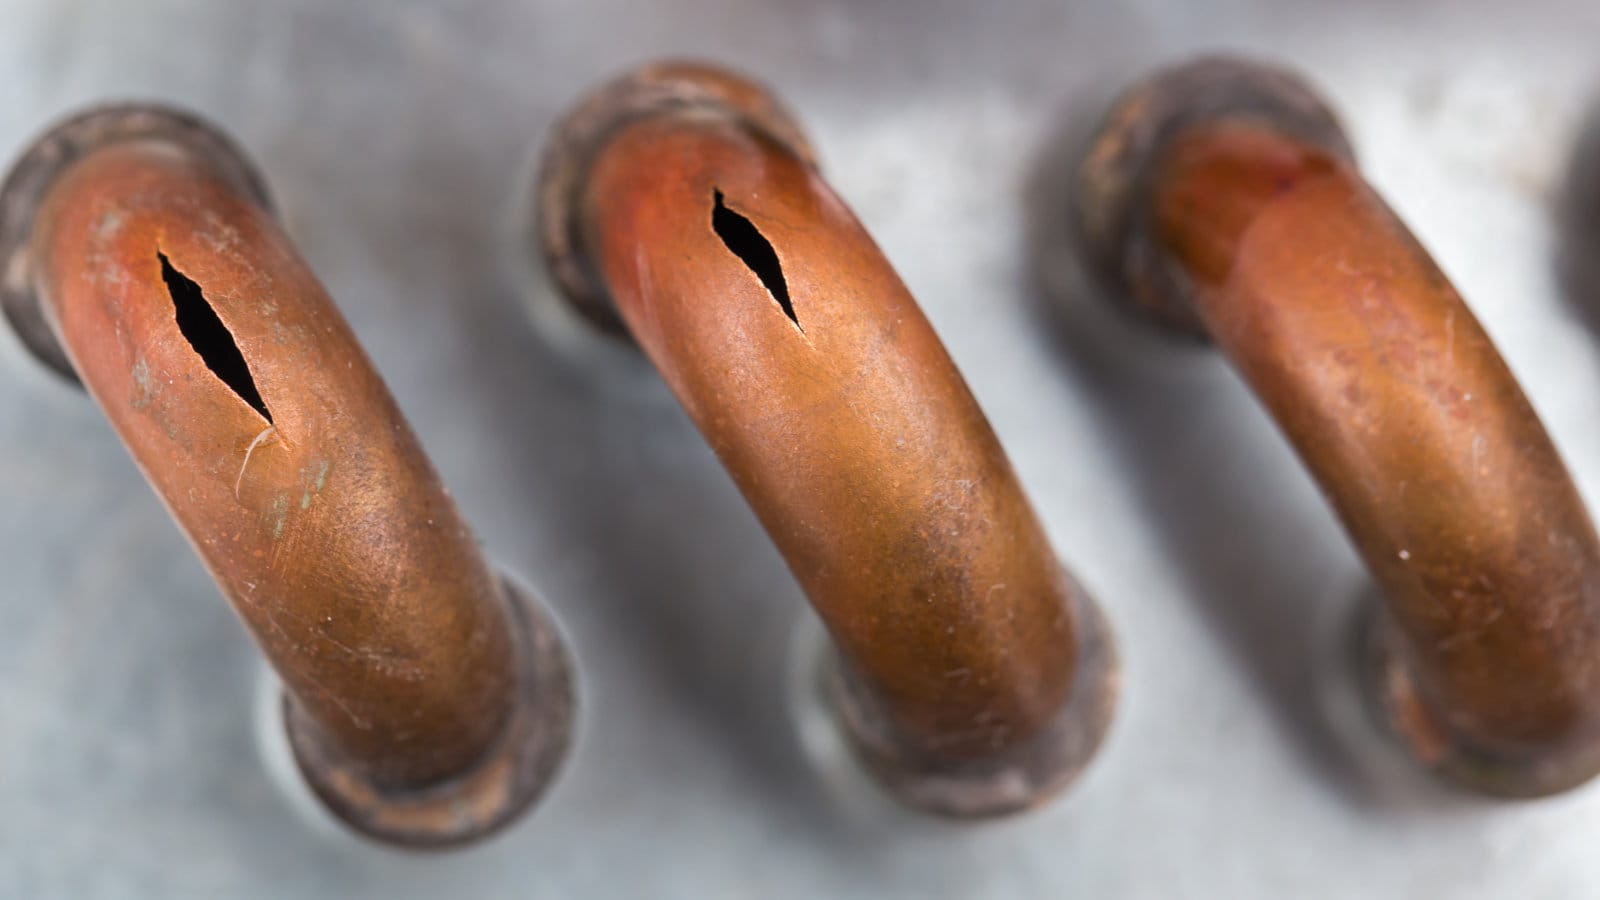 Close-up of damaged and corroded copper pipes with visible cracks, indicative of potential gas leaks in a home.